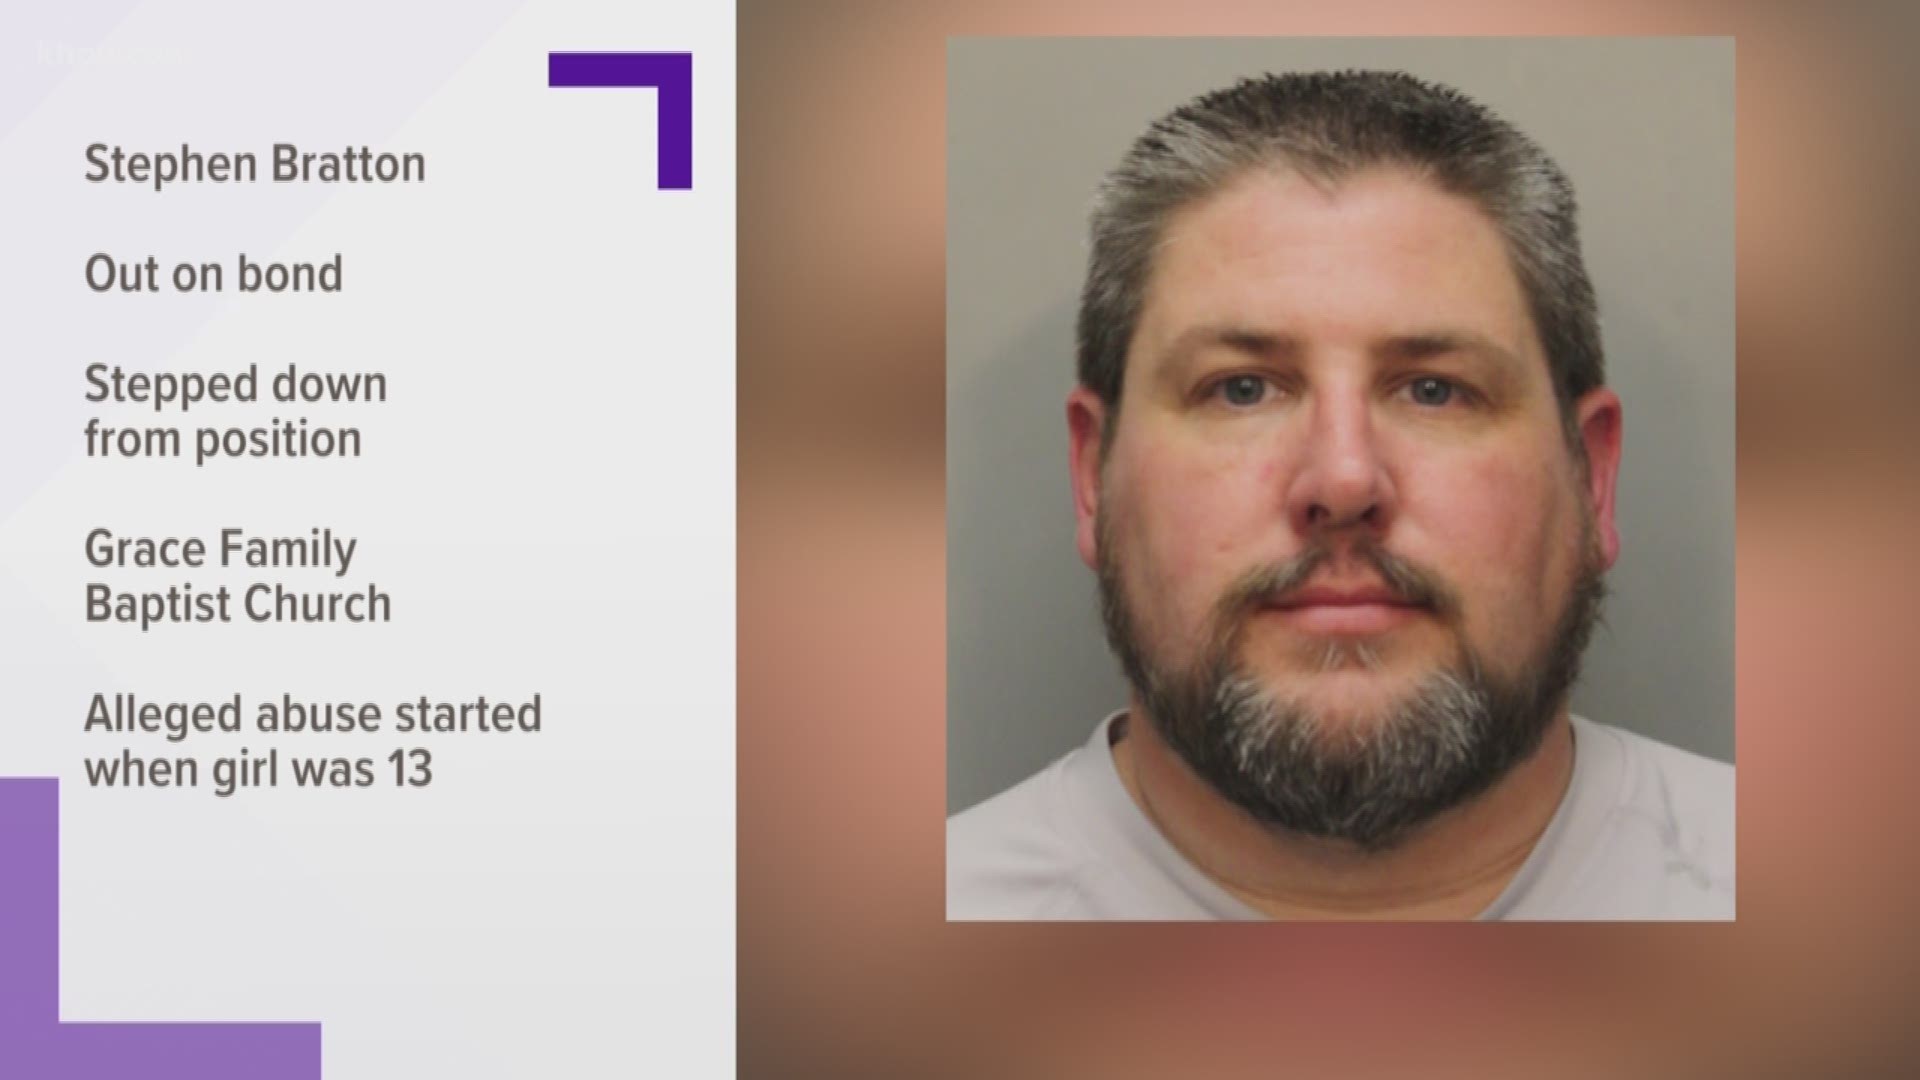 A man who was a pastor for many years in Houston has been arrested and charged with sexually abusing a child for years.